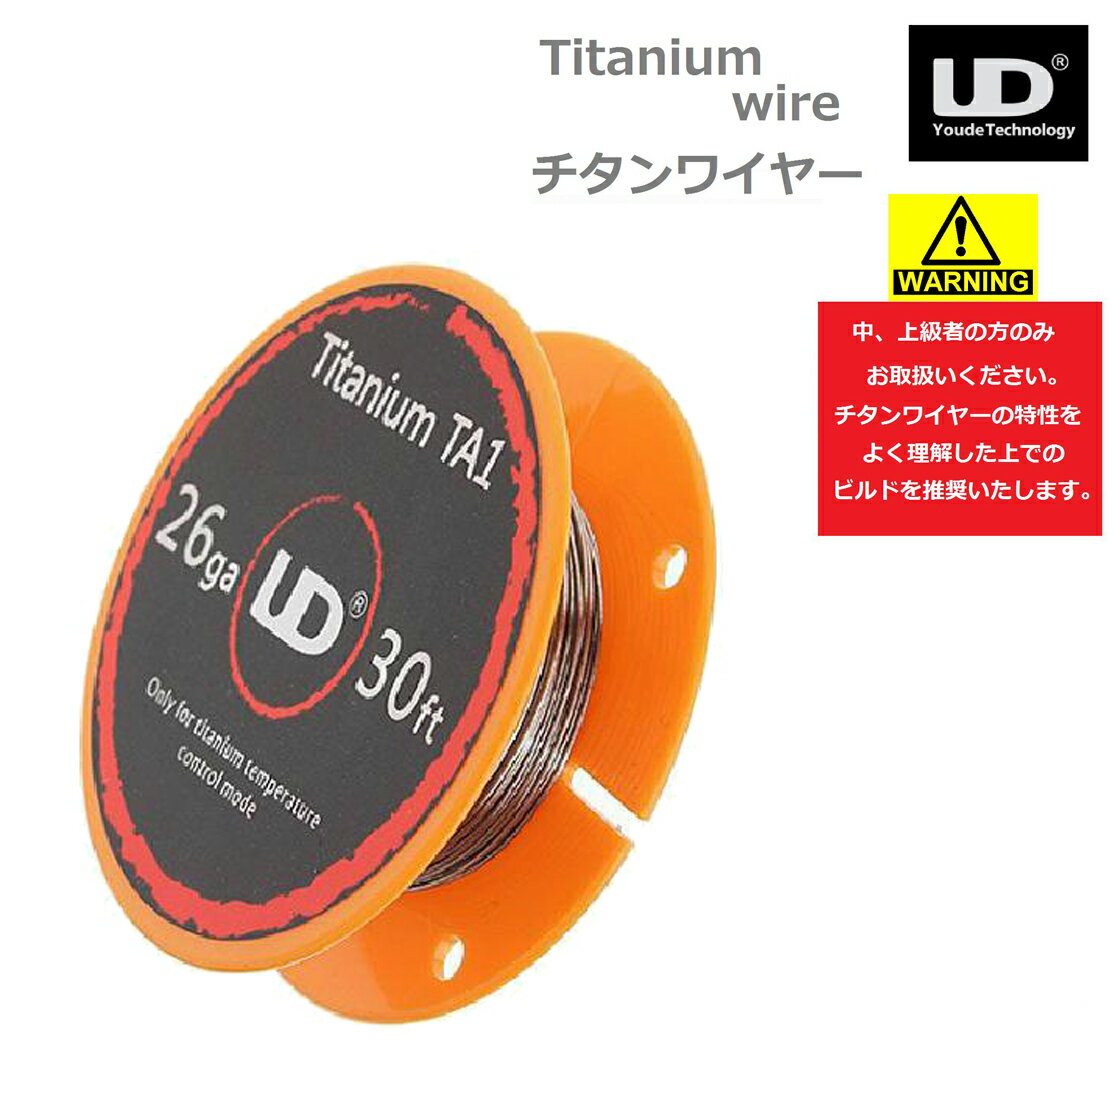 UD 磻䡼 ڥ˥ŻҥХ ٥ vape ӥ ӥ֥ titanium wire ӥ Ҹ [Z-87]